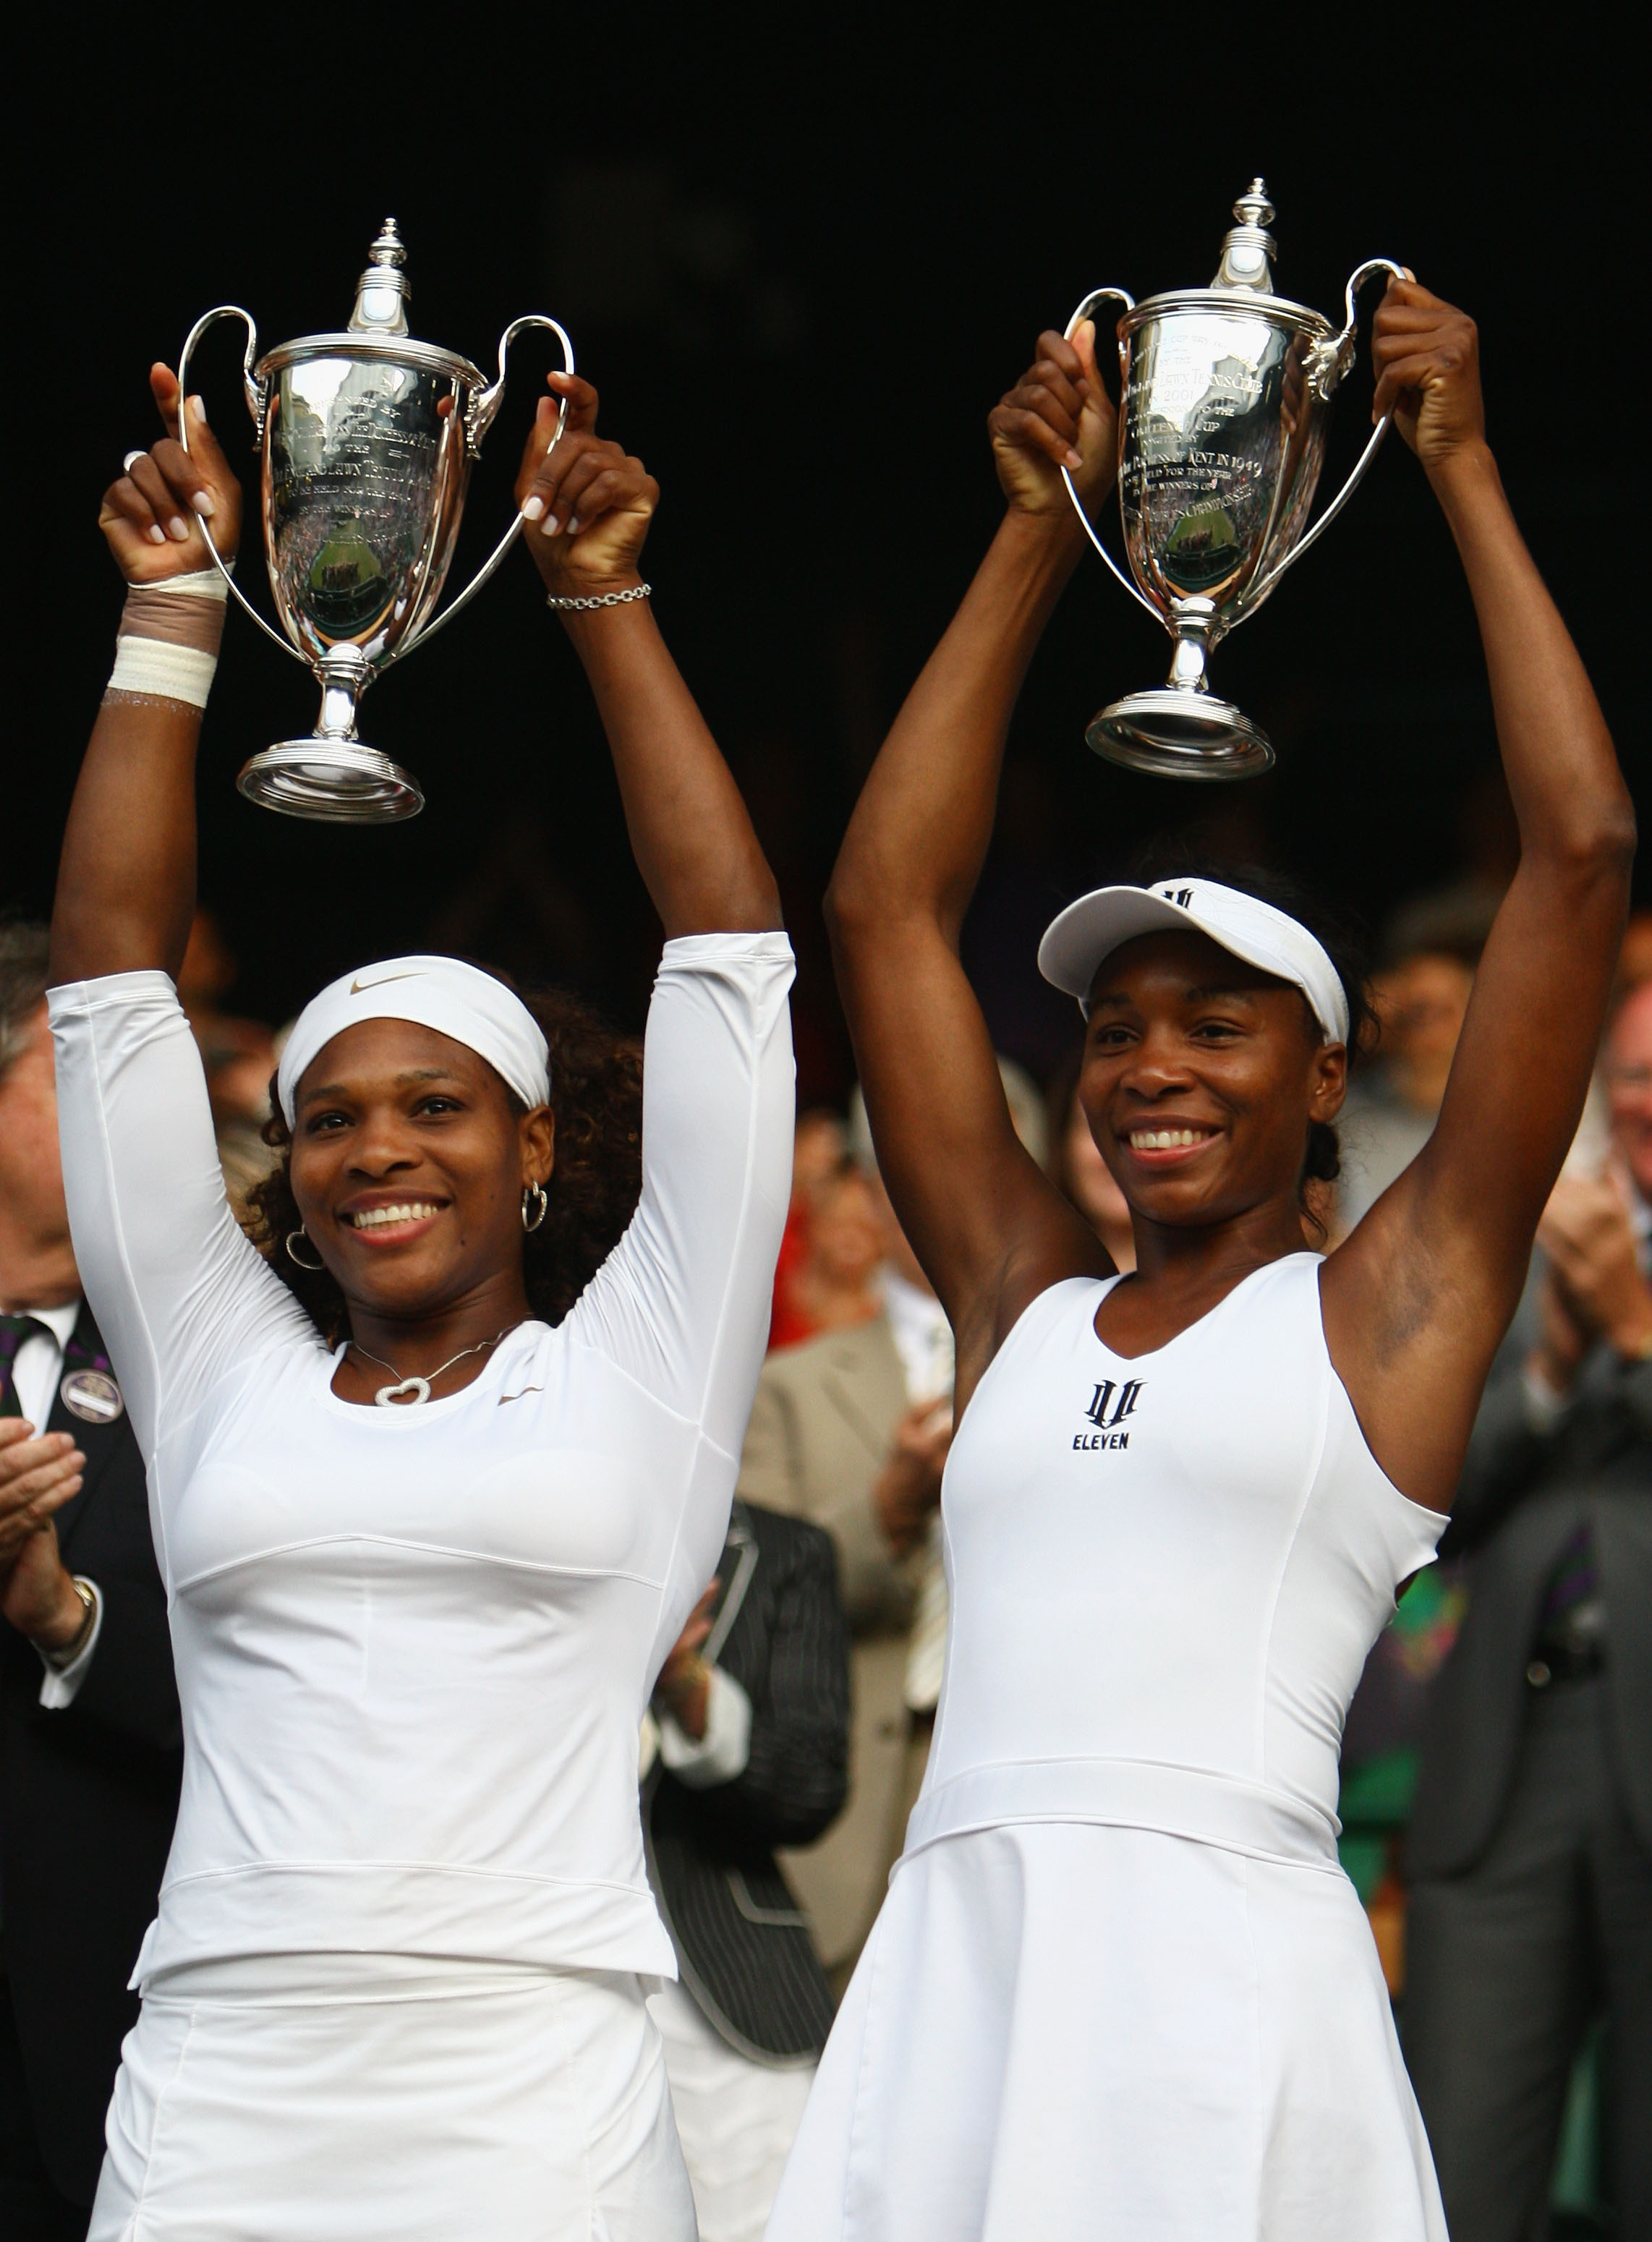 WIMBLEDON, ENGLAND - JULY 04:  Venus Williams of USA (L) and Serena Williams of USA celebrate victory with their trophies after the women's doubles final match against Samantha Stosur of Australia and Rennae Stubbs of Australia on Day Twelve of the Wimble